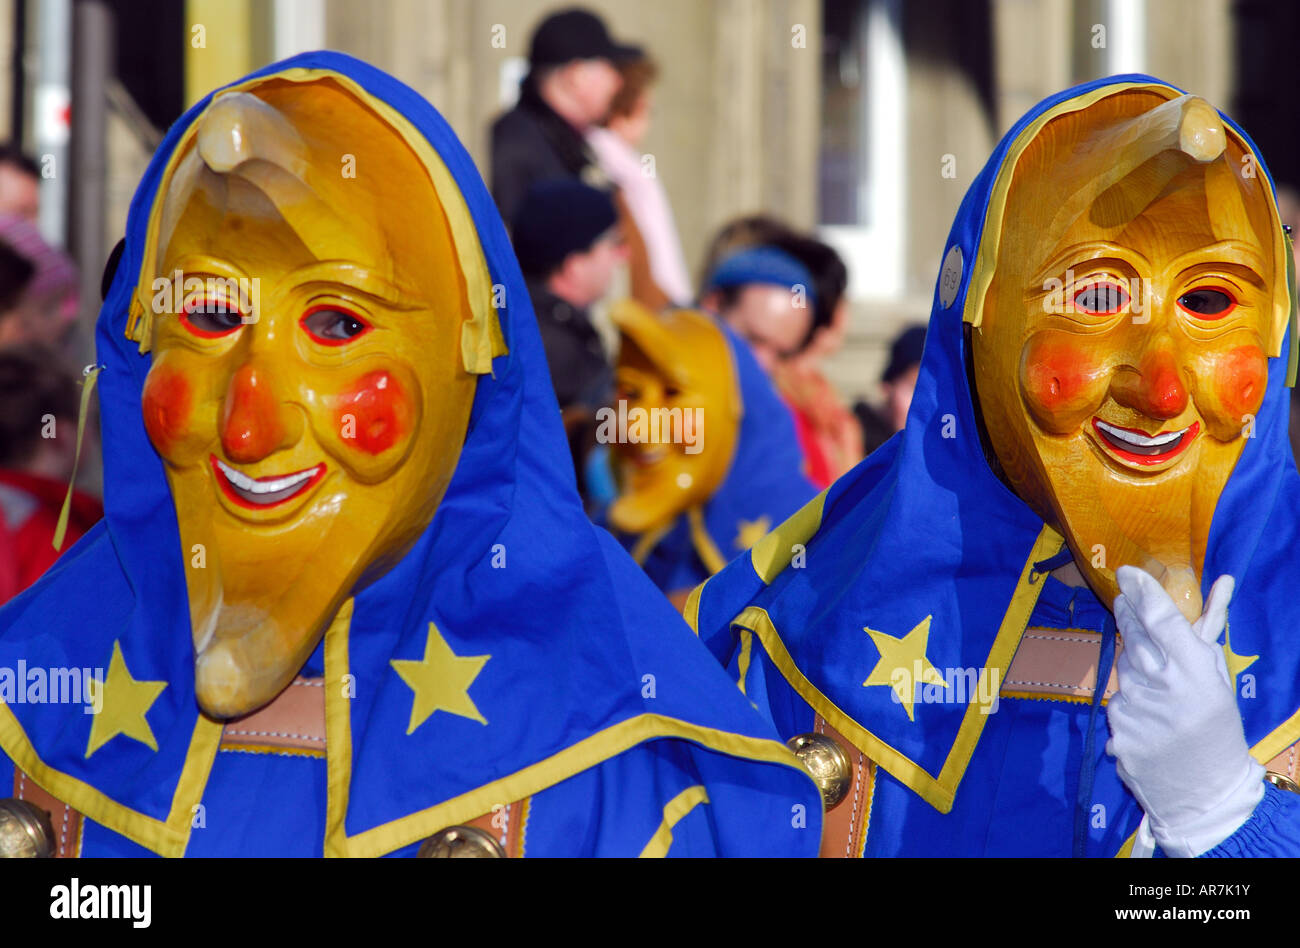 ben koks resterende At German Carnival High Resolution Stock Photography and Images - Alamy